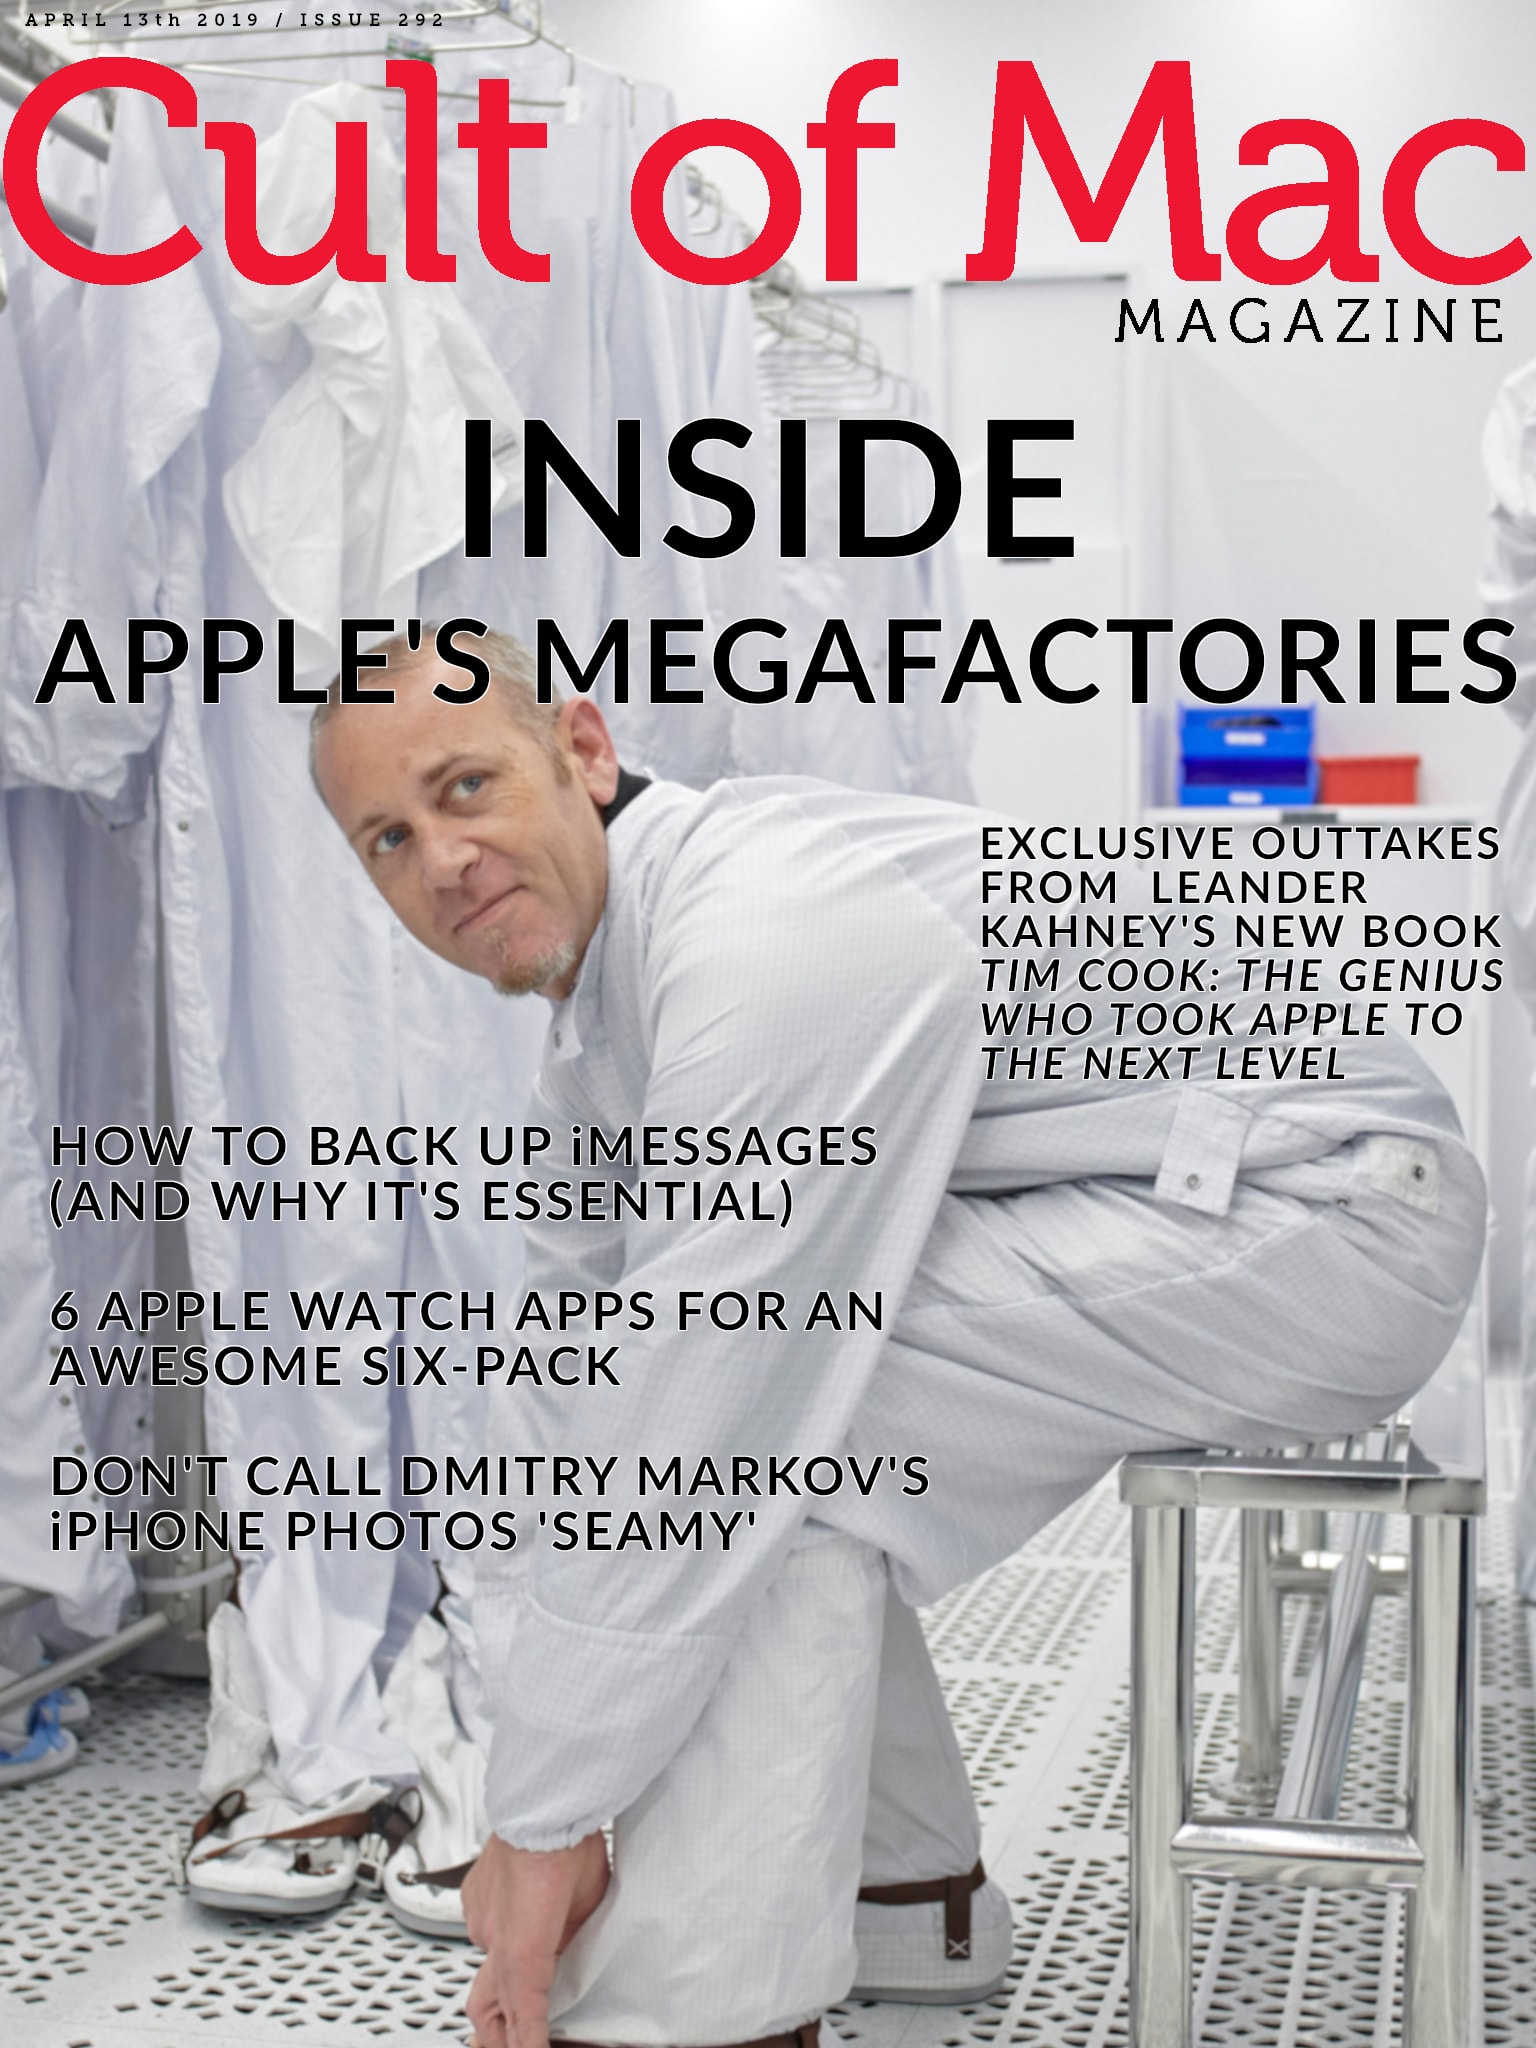 Exclusive outtakes from Leander's new book on Tim Cook take you inside Apple's innovative manufacturing process.